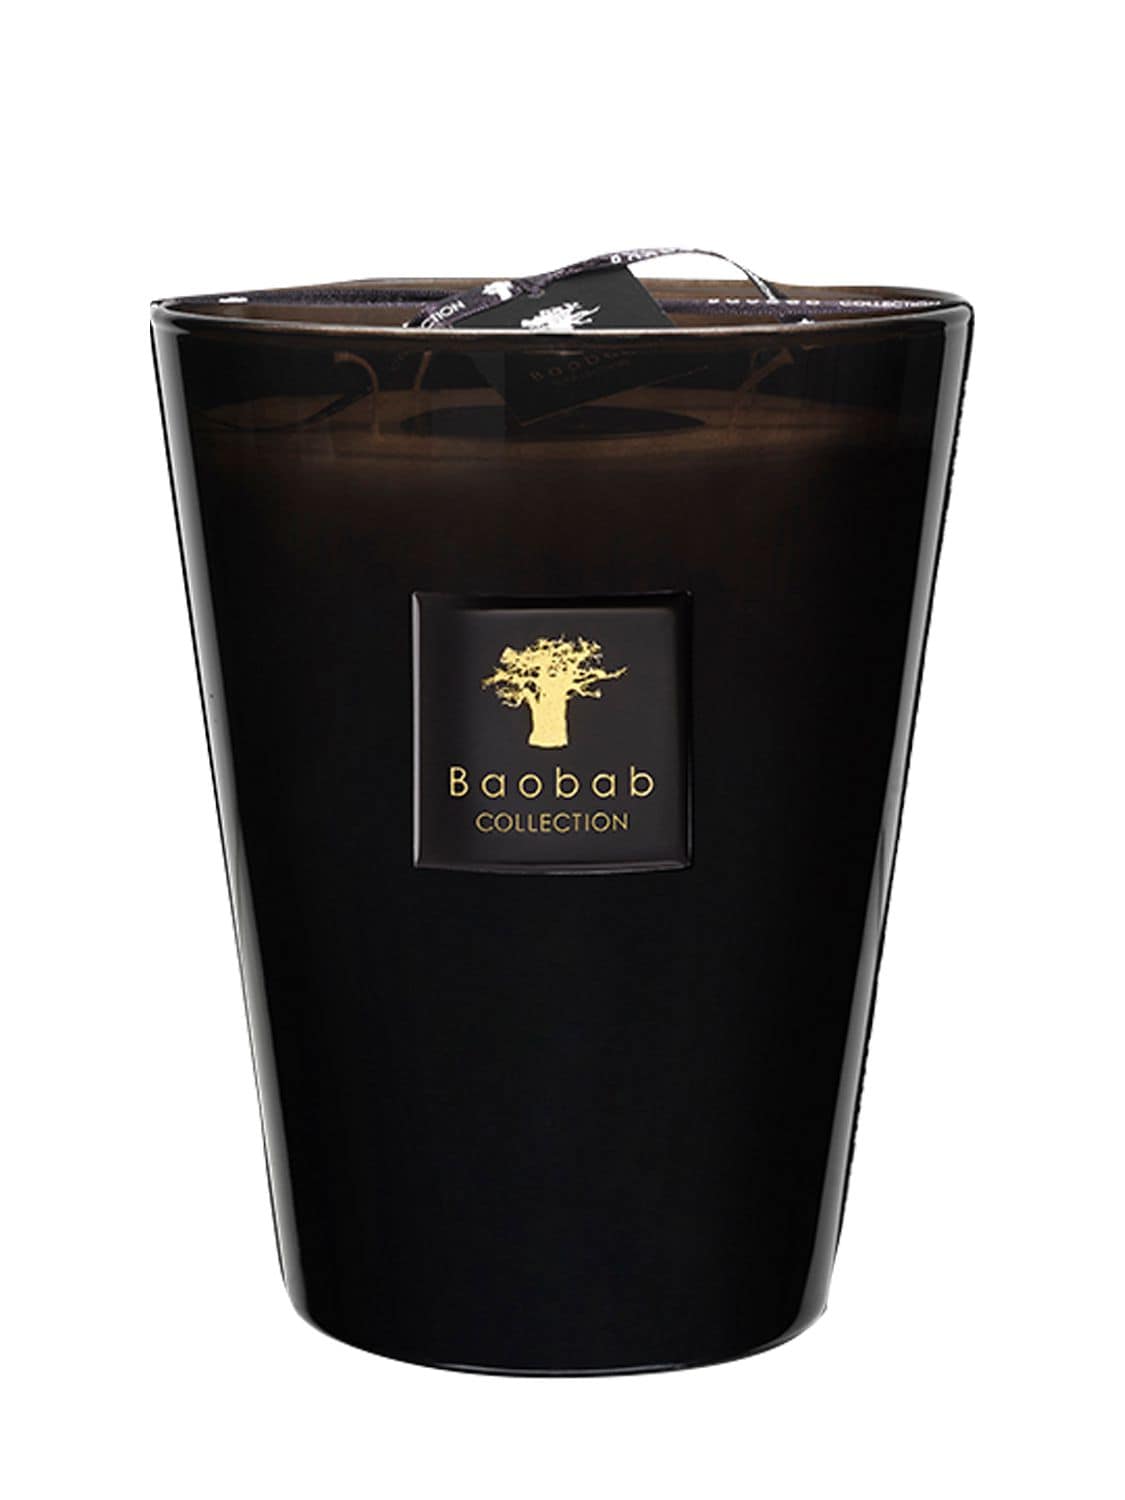 Baobab Collection Encre De Chine Candle In Black